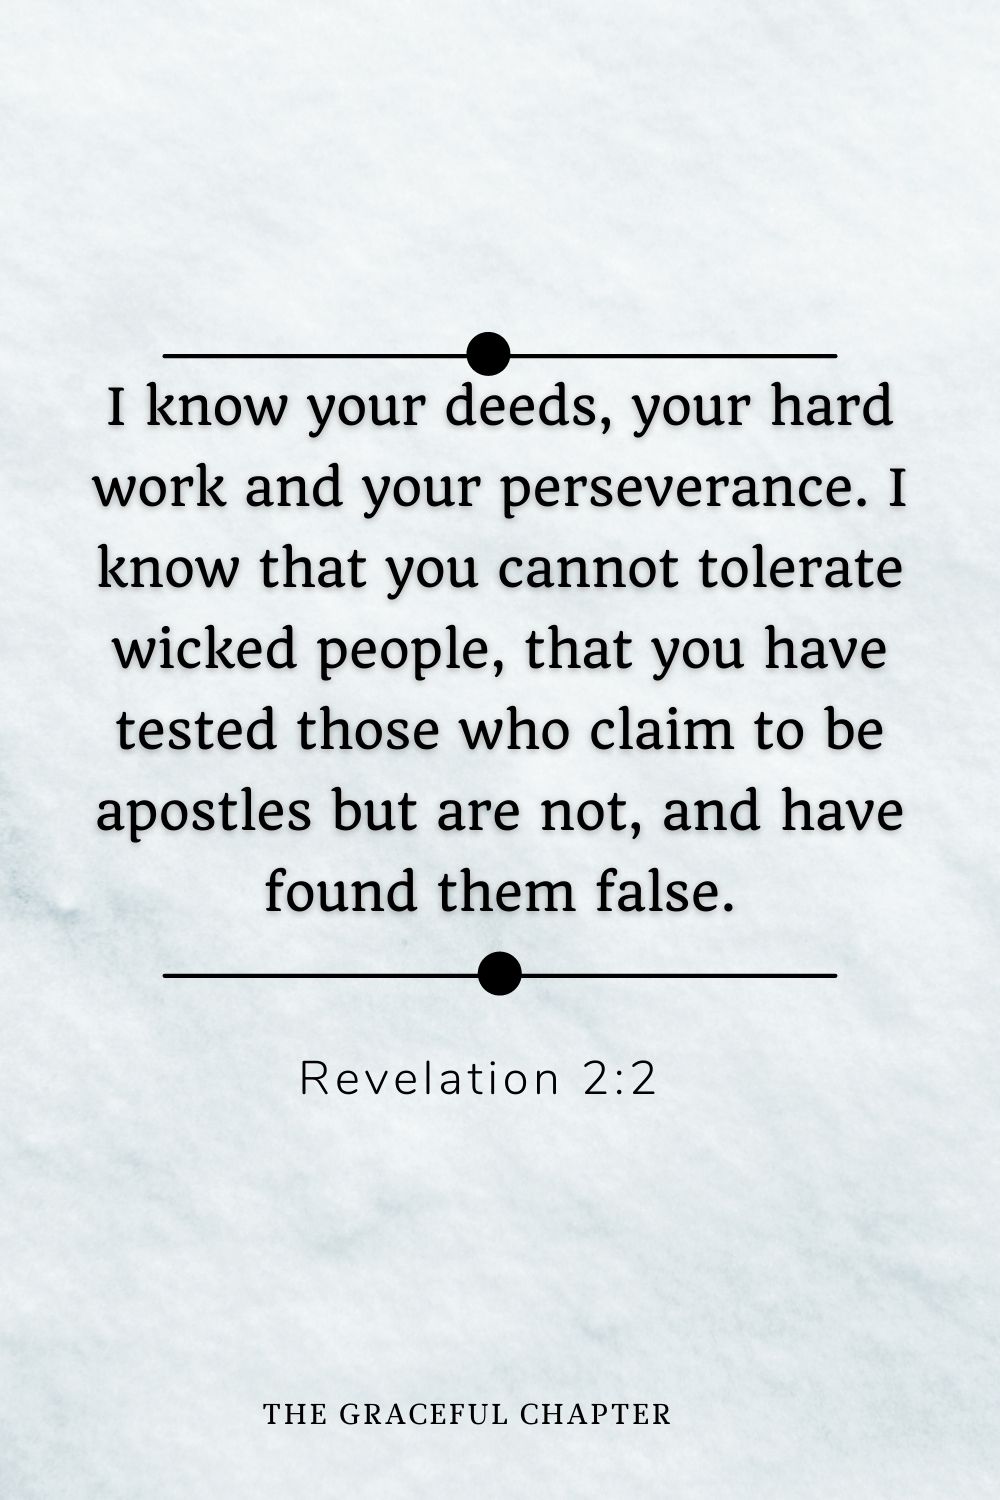 I know your deeds, your hard work and your perseverance. I know that you cannot tolerate wicked people, that you have tested those who claim to be apostles but are not, and have found them false. Revelation 2:2